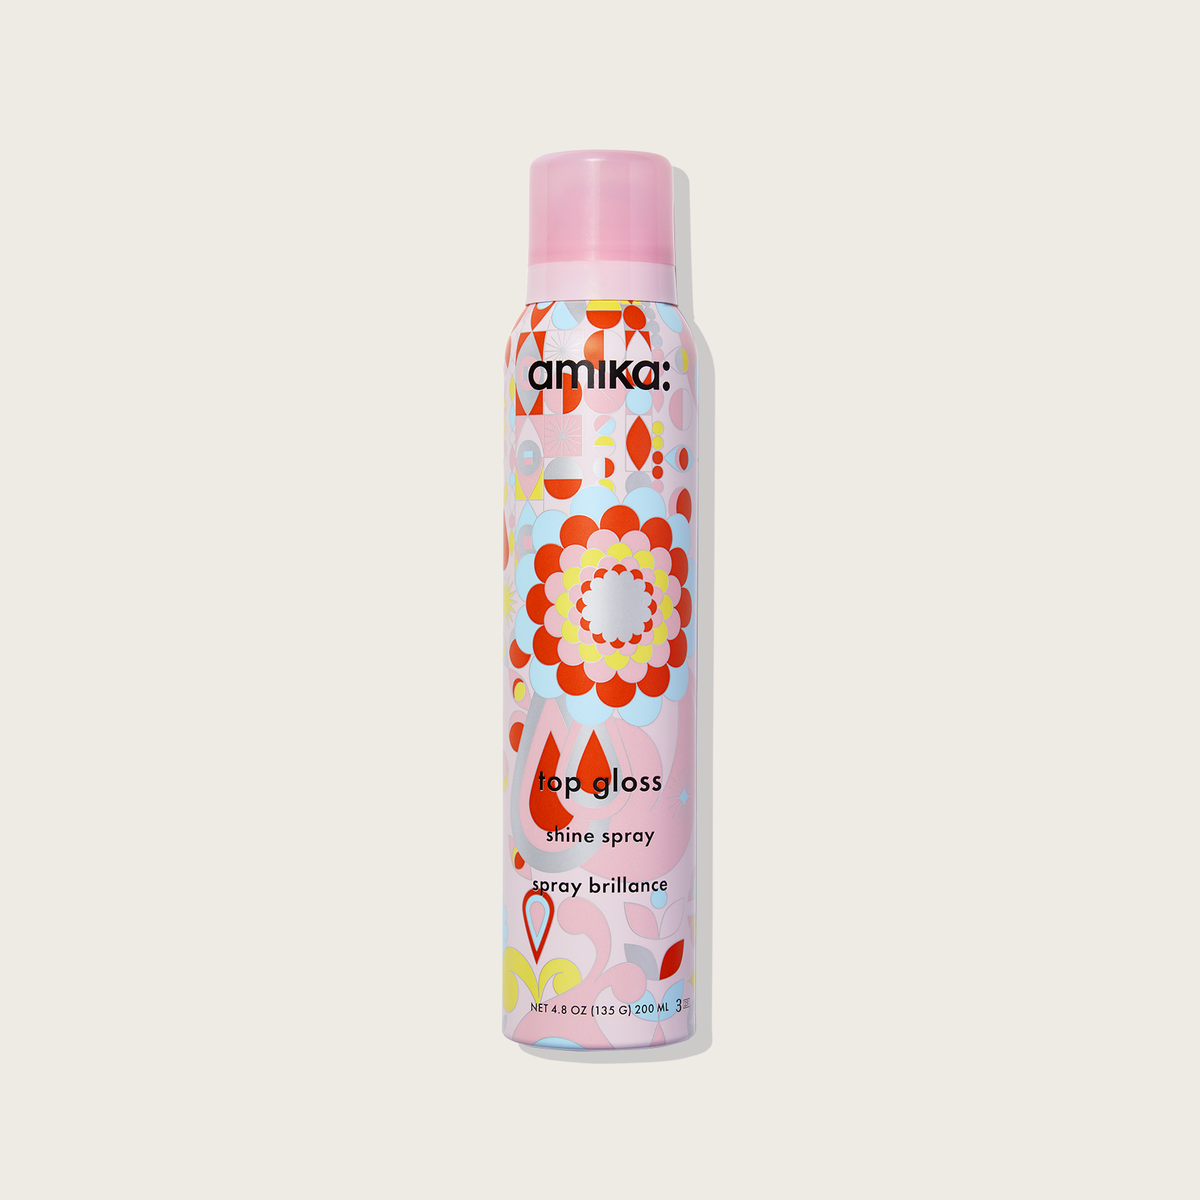 Amika - Top Gloss - Shine Spray |4.8 oz| - ProCare Outlet by Amika